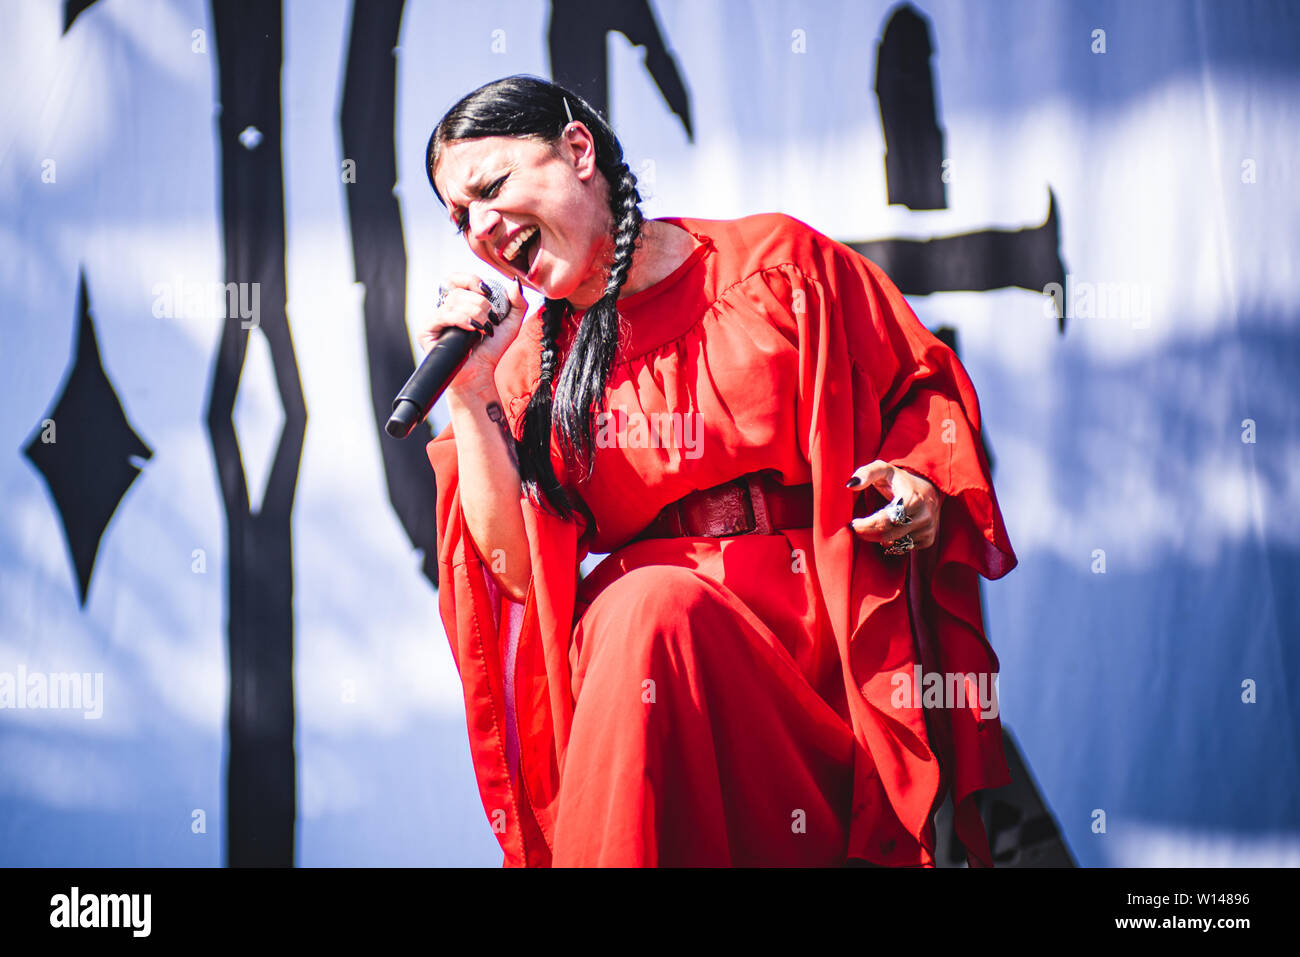 Cristina Scabbia, singer of the Italian gothic metal band Lacuna Coil, performing live on stage in Bologna, at the Bologna Sonic Park 2019 first ever edition, opening for Slipknot. (Photo by Alessandro Bosio / Pacific Press) Stock Photo